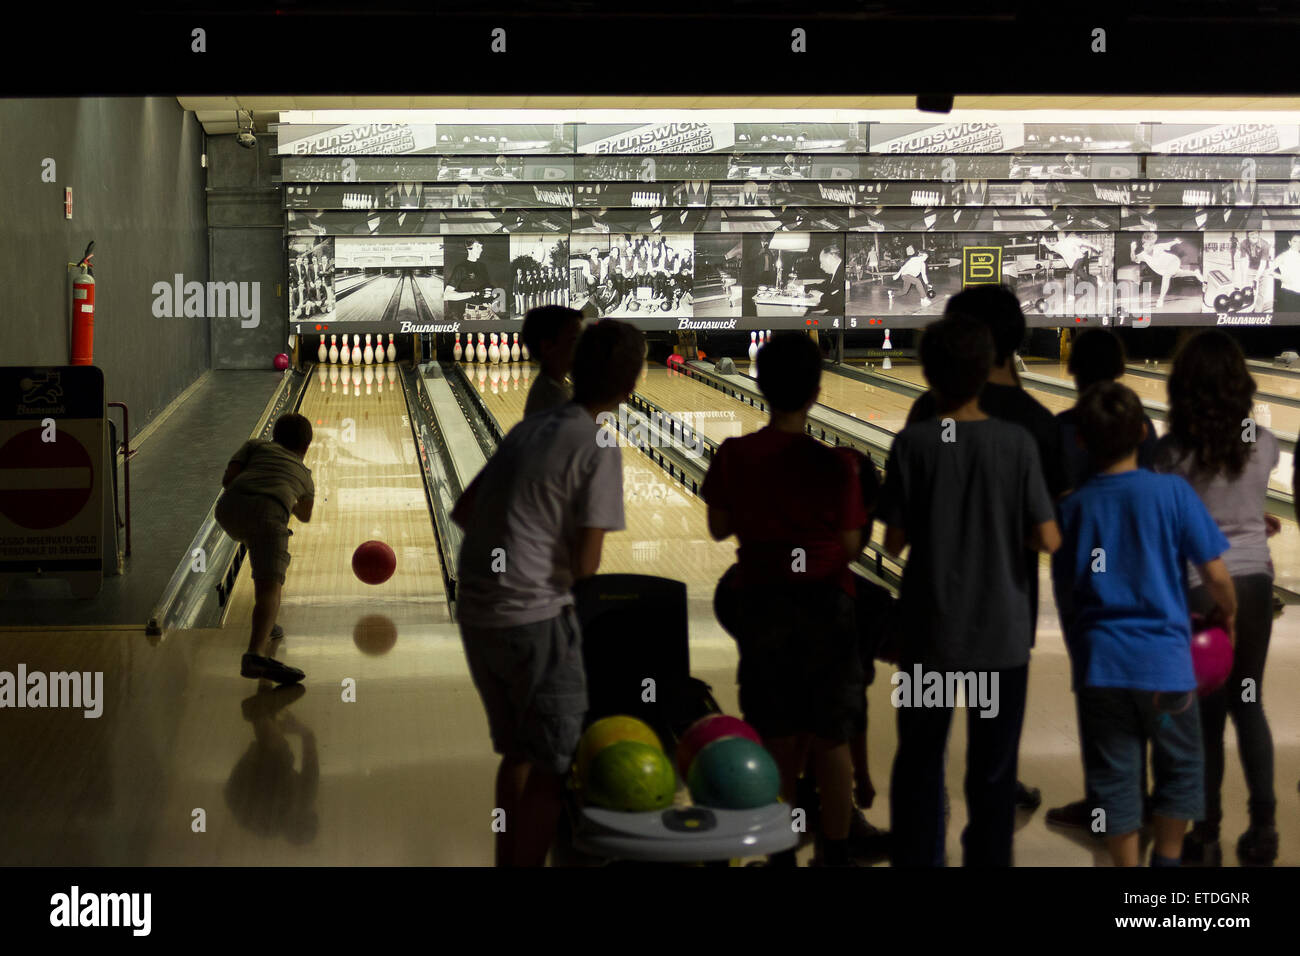 Rome, Italy, 05/12/2015 - Children's bowling match in Brunswick bowling  center. Special children lanes were used for this match Stock Photo - Alamy